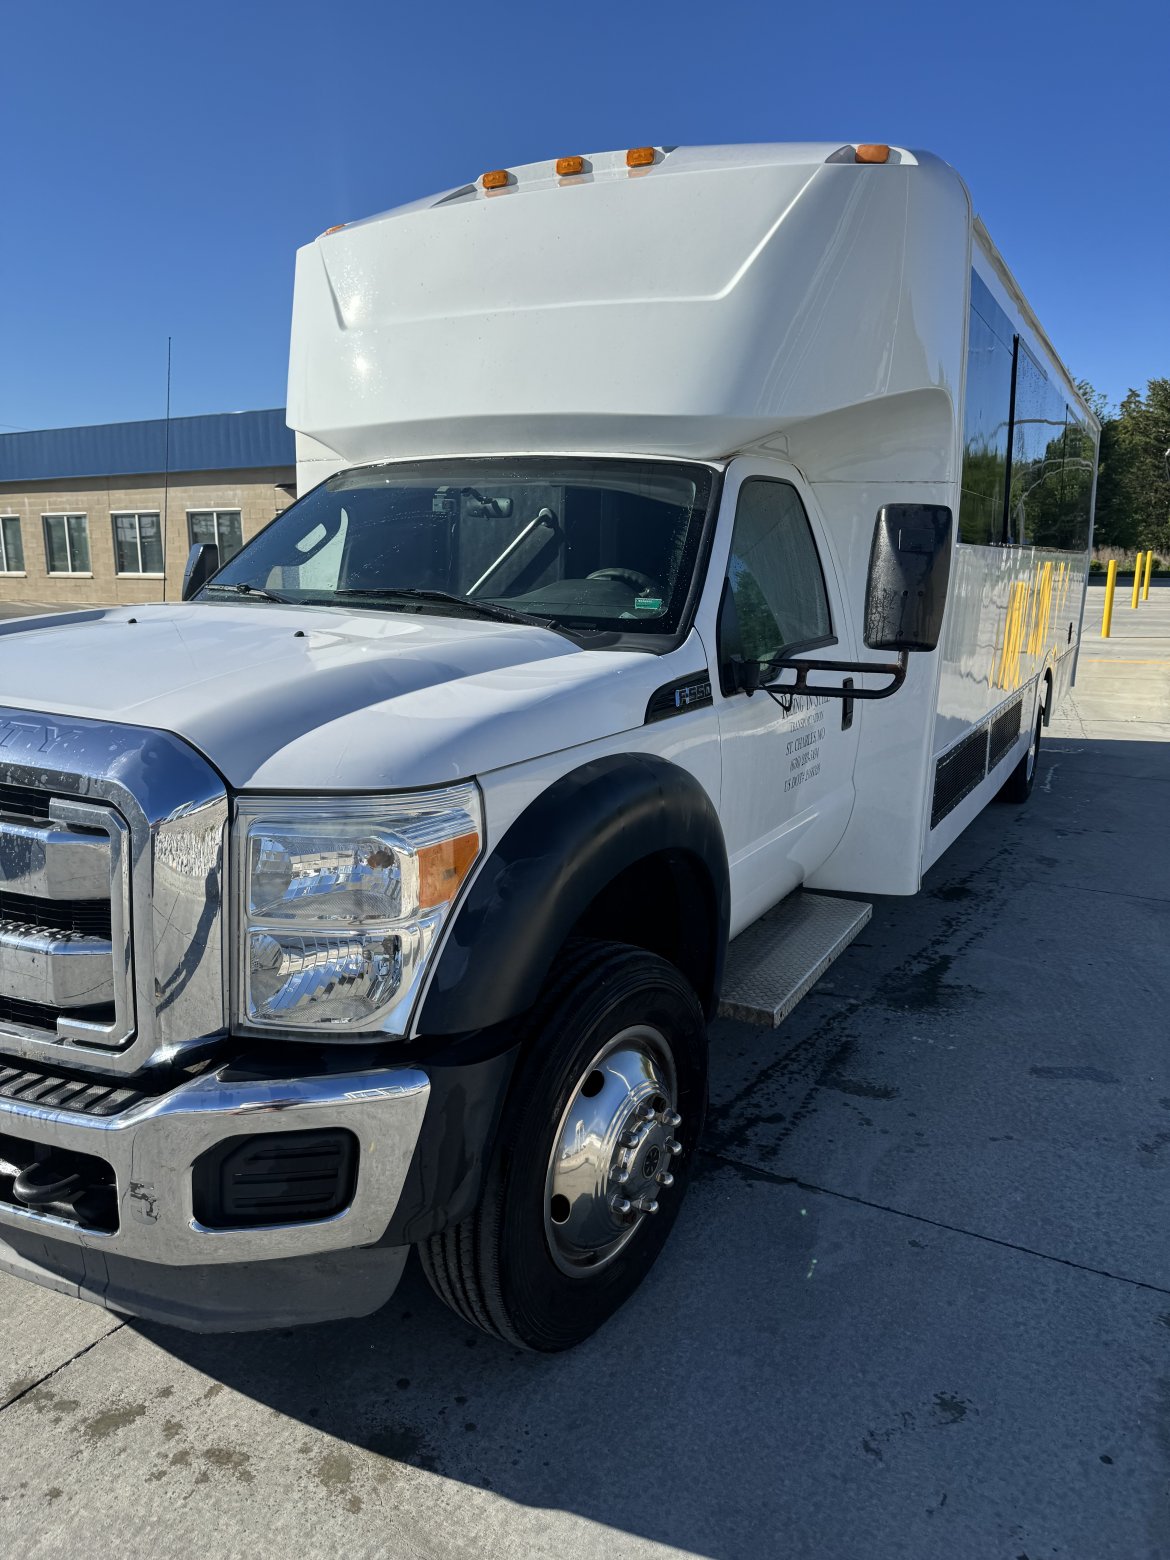 Limo Bus for sale: 2012 Ford F-550 34&quot; by LGE